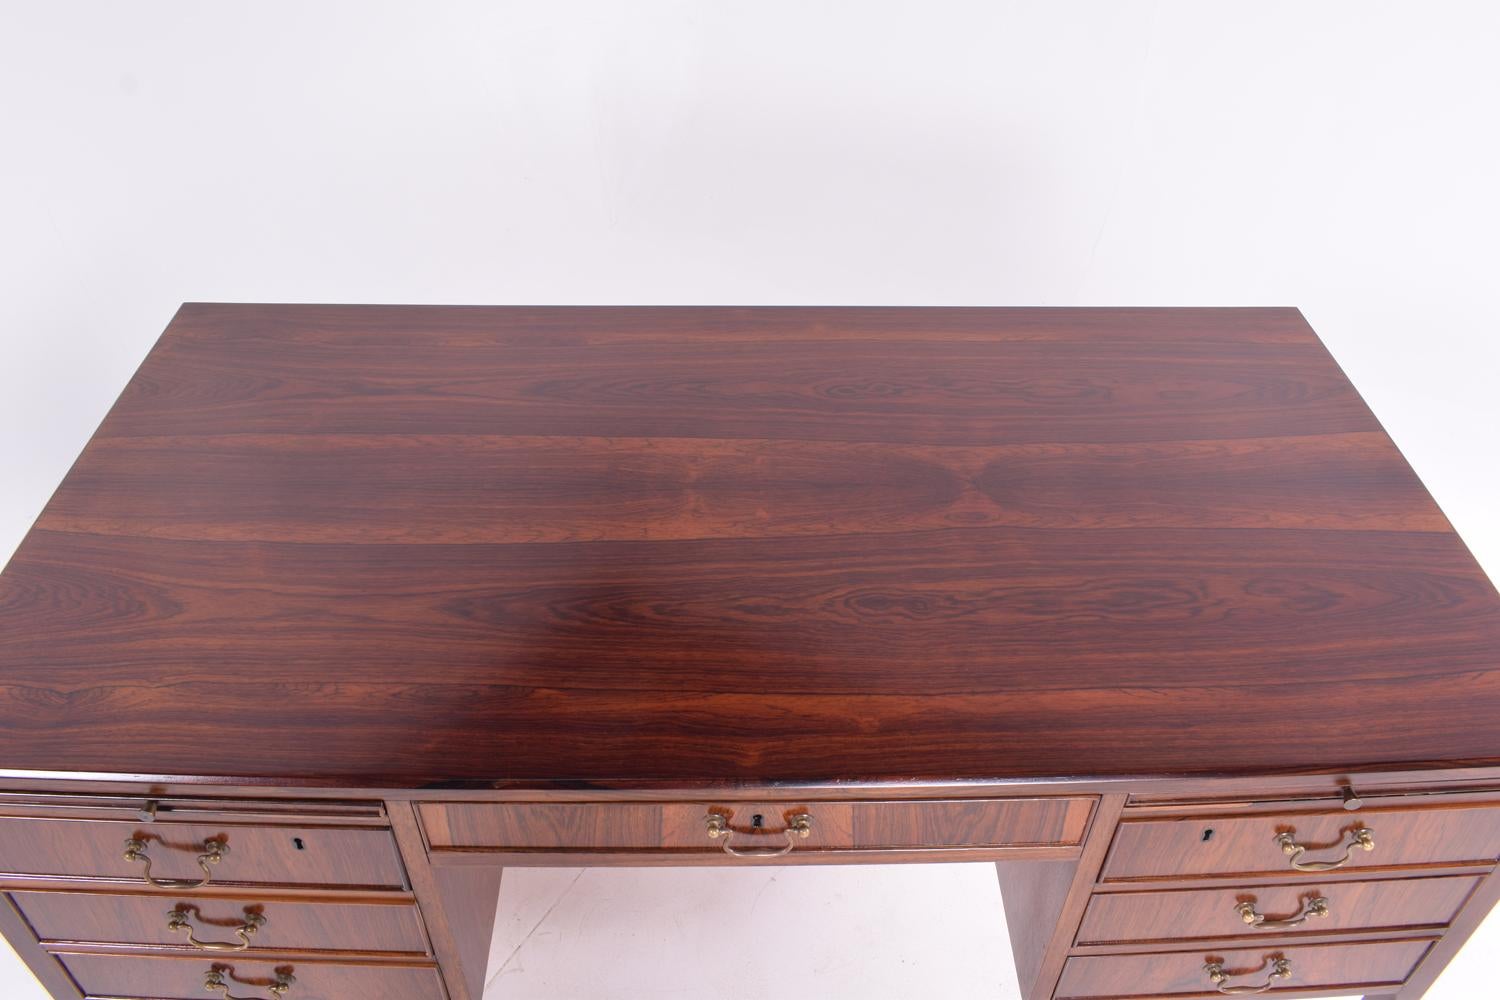 20th Century Midcentury Rosewood Desk by Ole Wanscher for AJ Iversen, 1950s